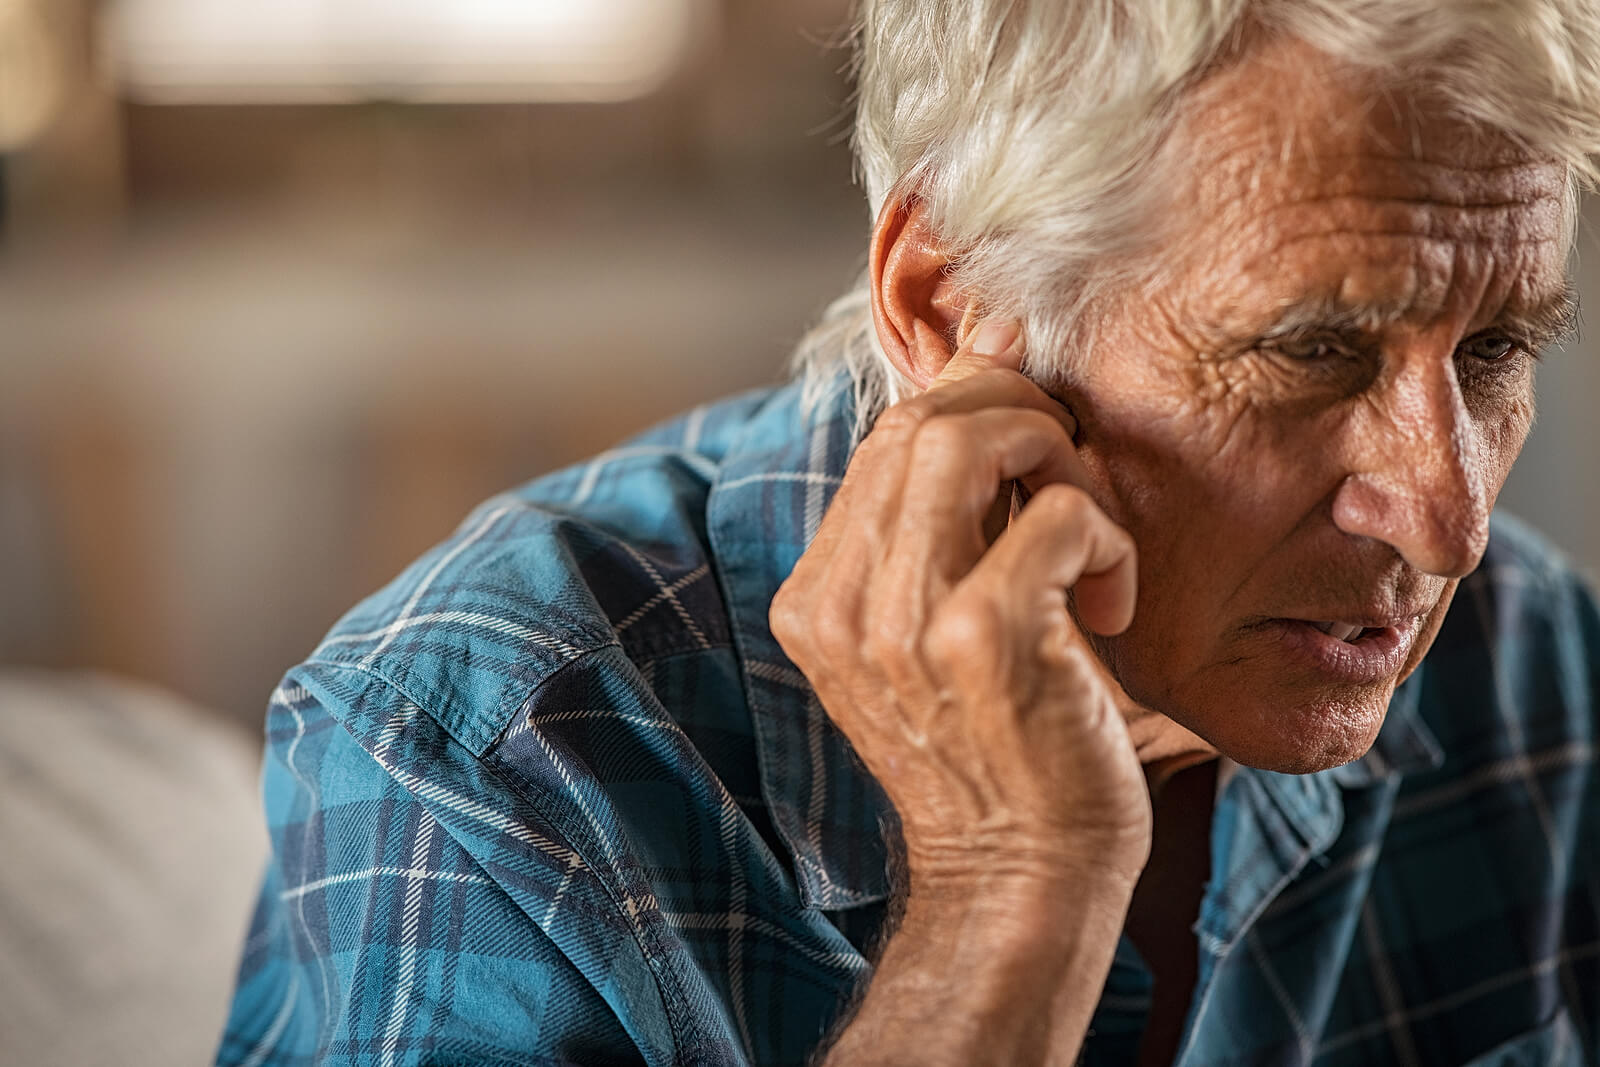 Featured image for “Hearing Loss is Associated with a 91% Increased Risk for Dementia”